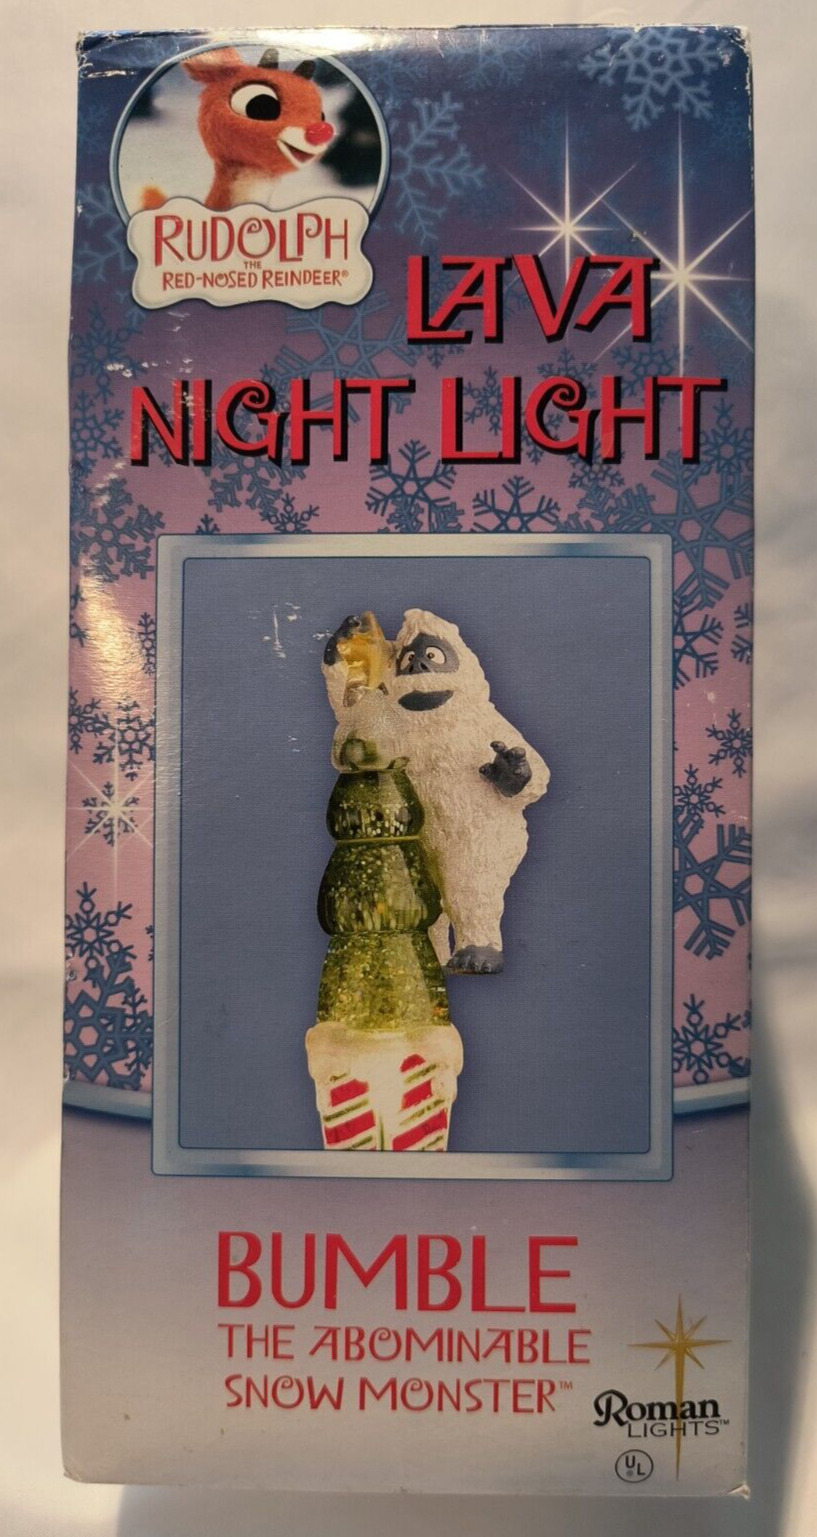 Rudolph Red Nosed Reindeer Lava Night Light BUMBLE Abominable Snow Monster